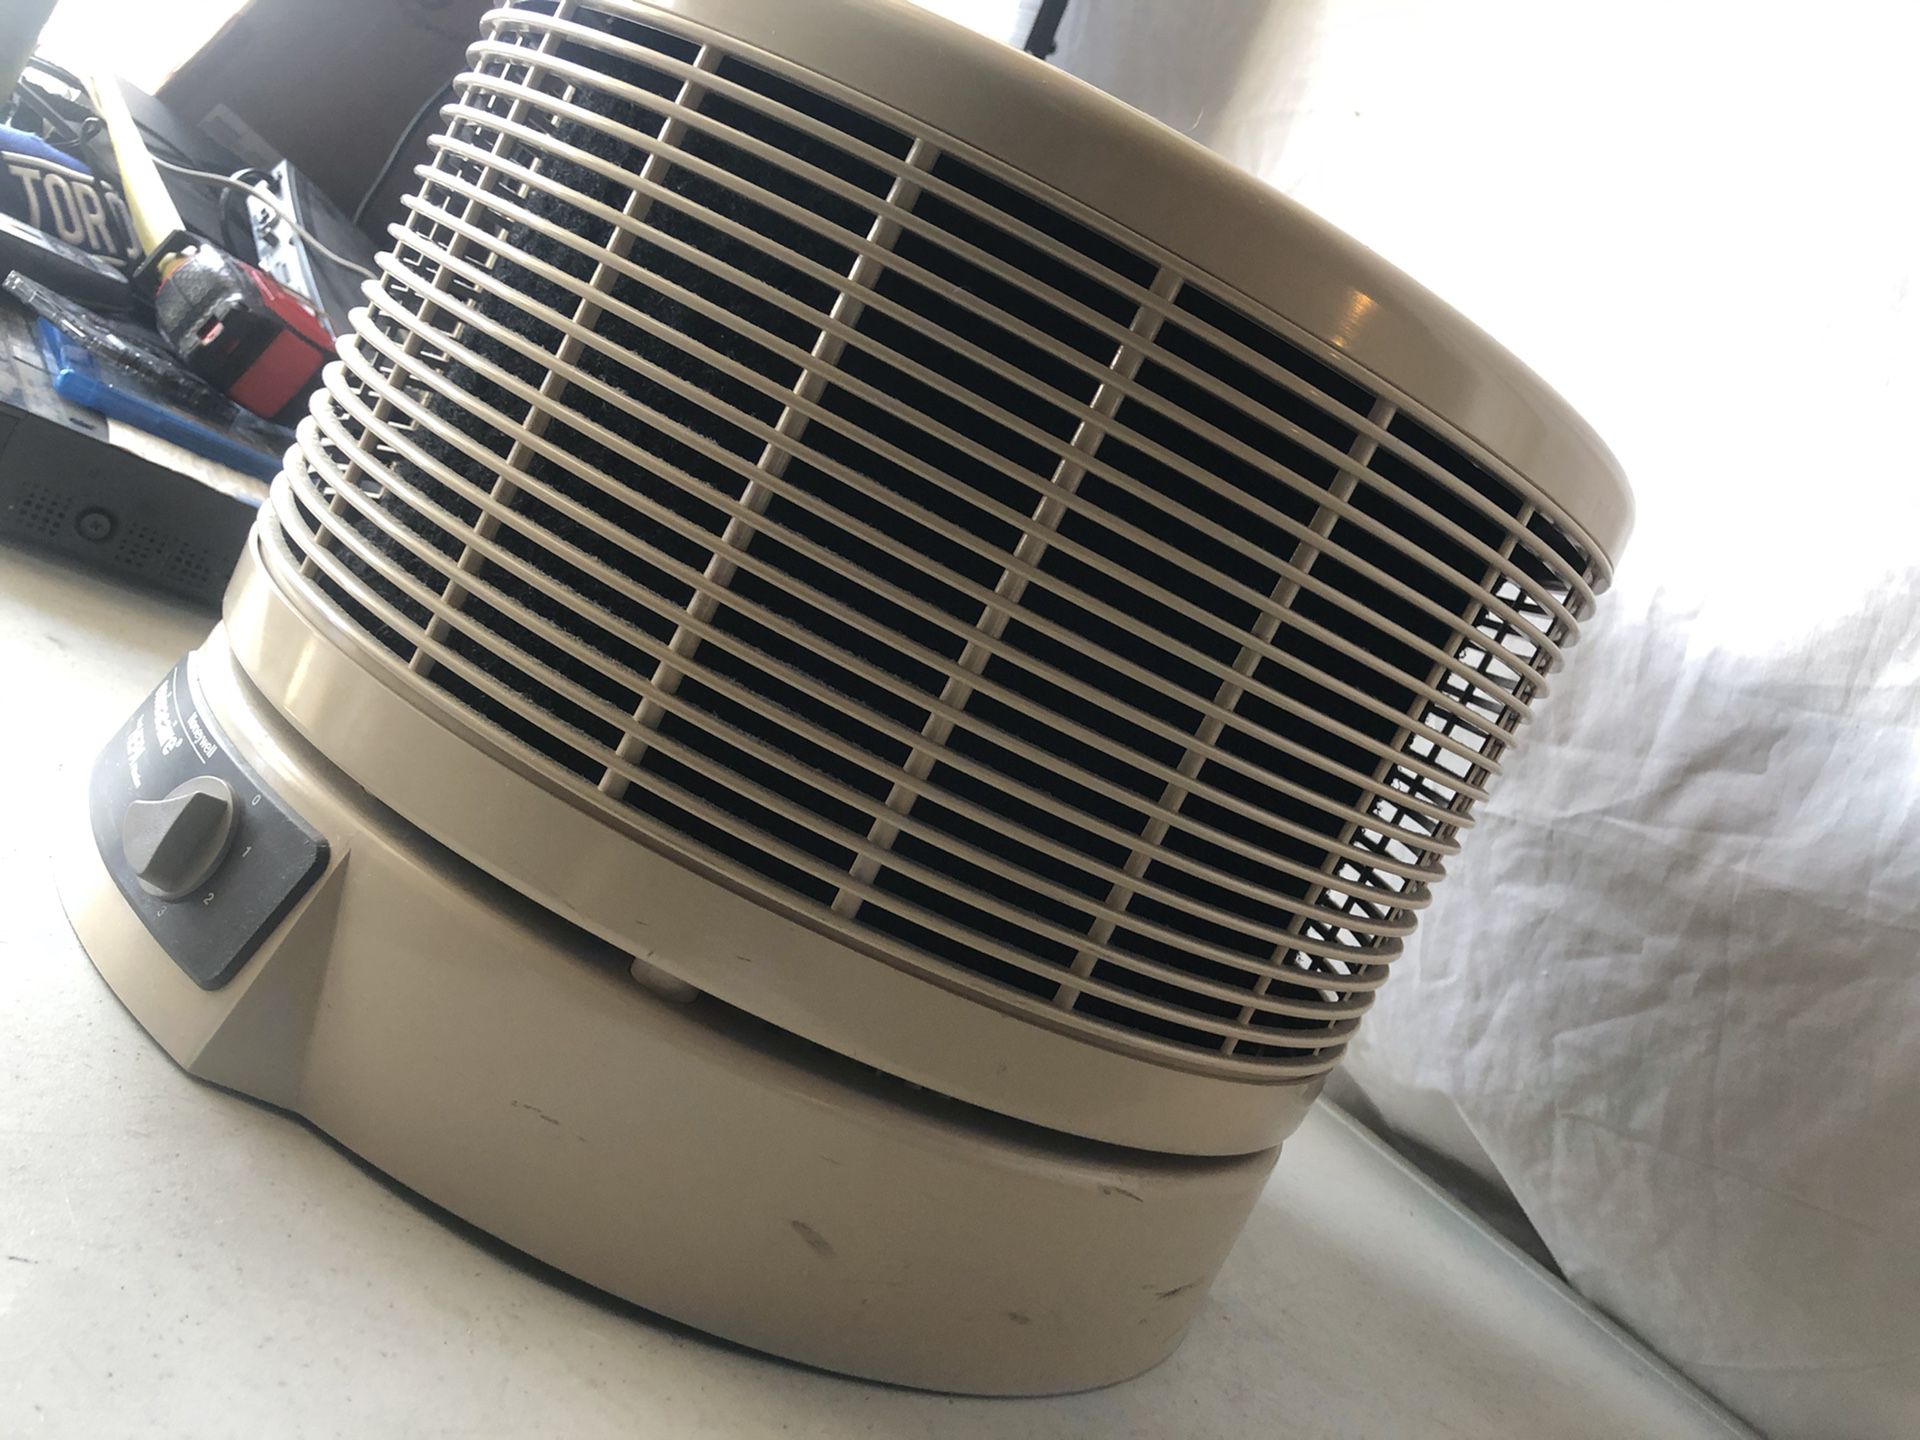 PRICE IS FIRM Honeywell 12520 HEPA Air Purifier COVERS 320 sq ft !!BRAND NEW FILTERS!! COMPLETELY CHANGES THE WHOLE AIR IN THE ROOM 6 times every hour